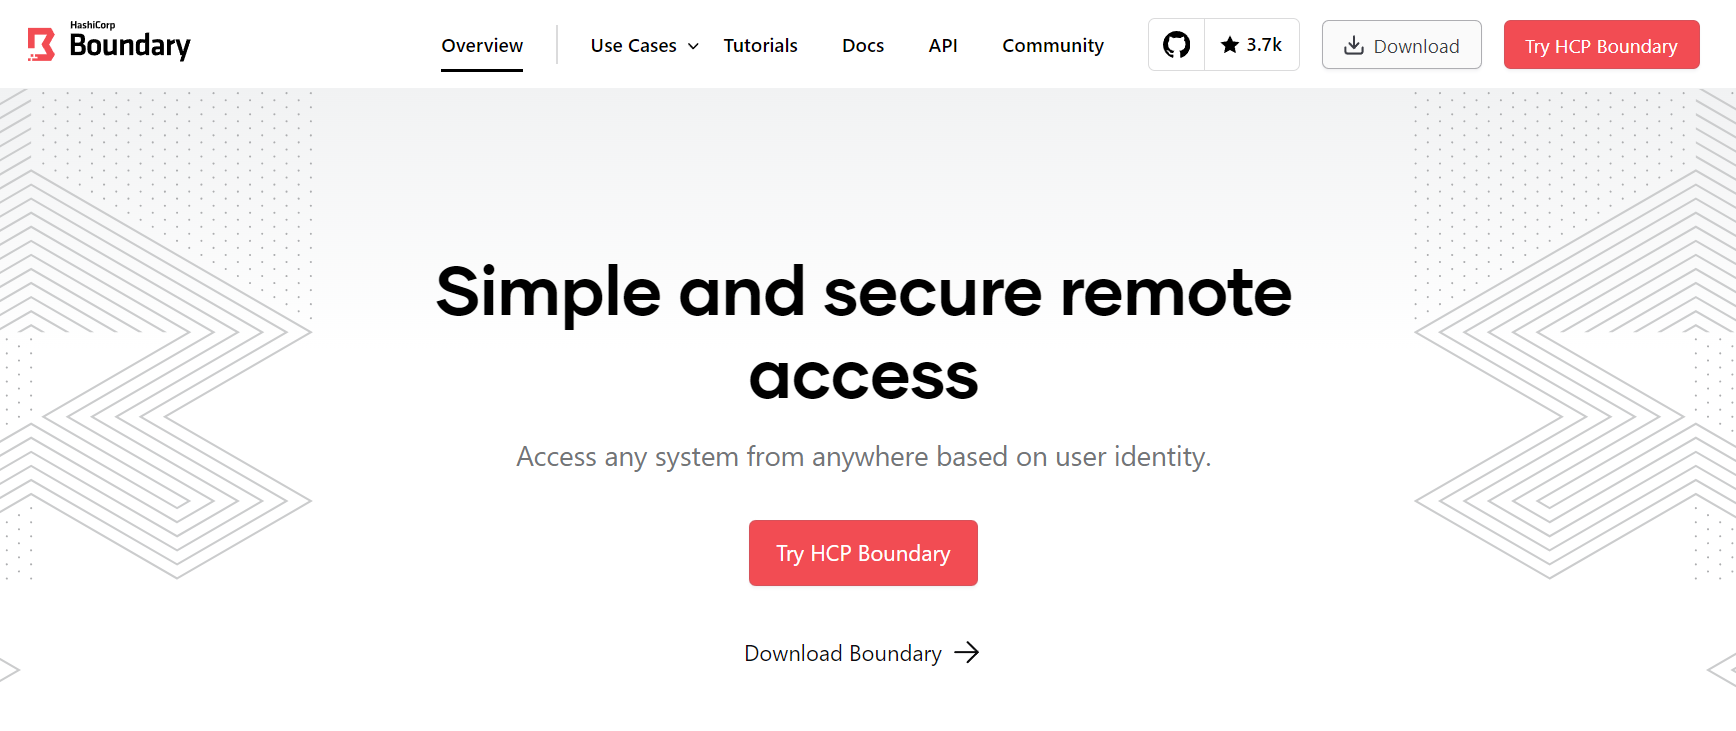 HashiCorp Boundary PAM Solutions